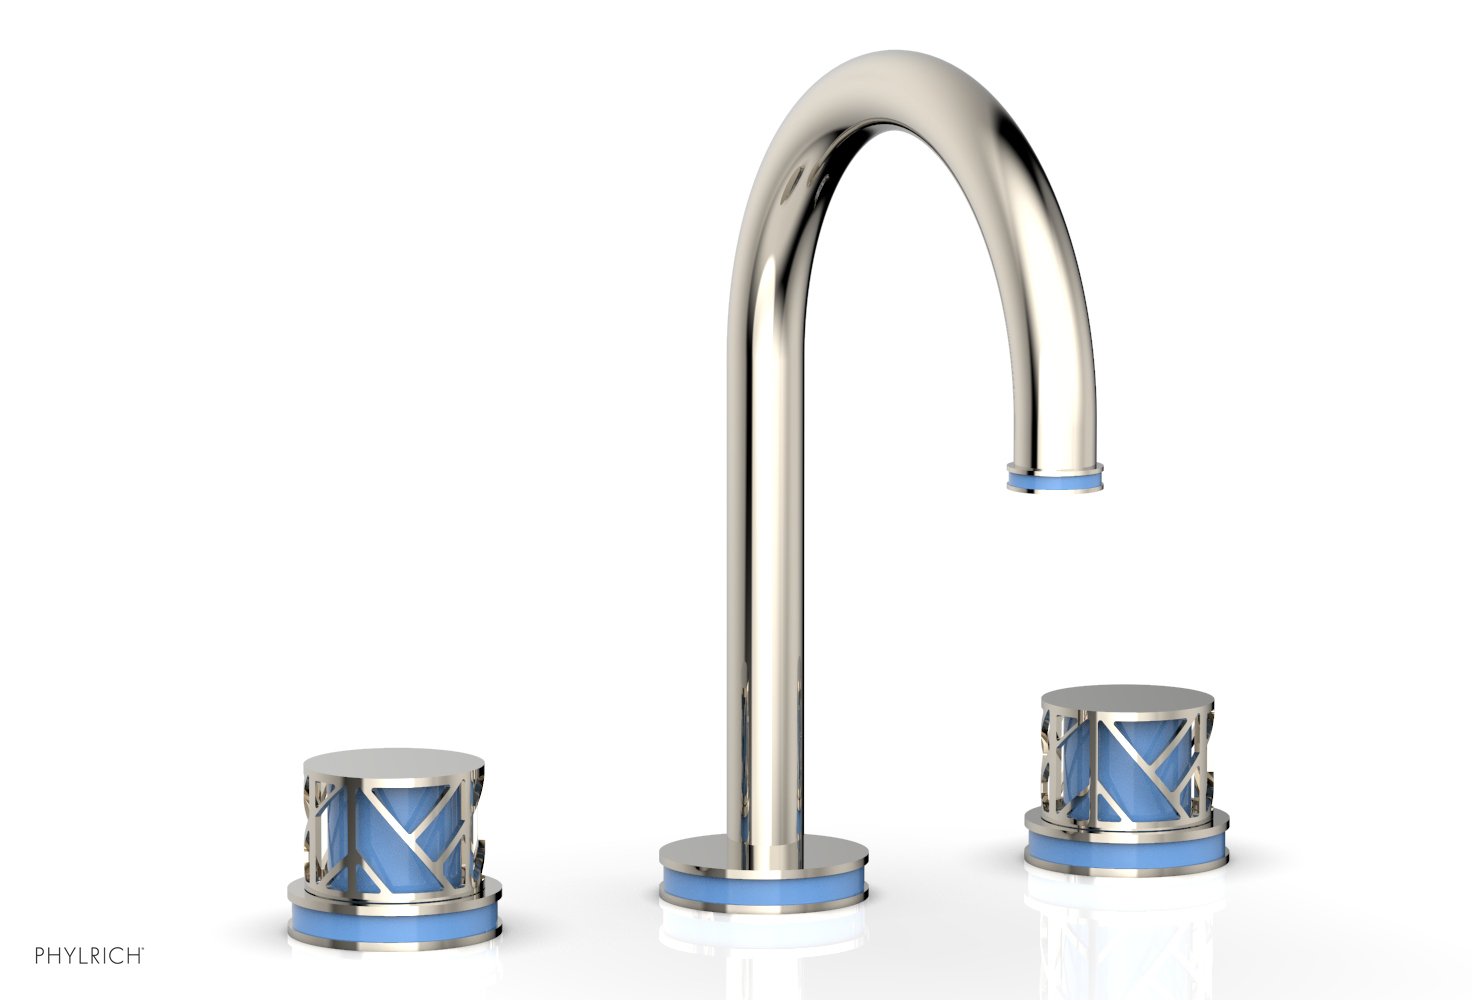 Phylrich JOLIE Widespread Faucet - Round Handles with "Light Blue" Accents